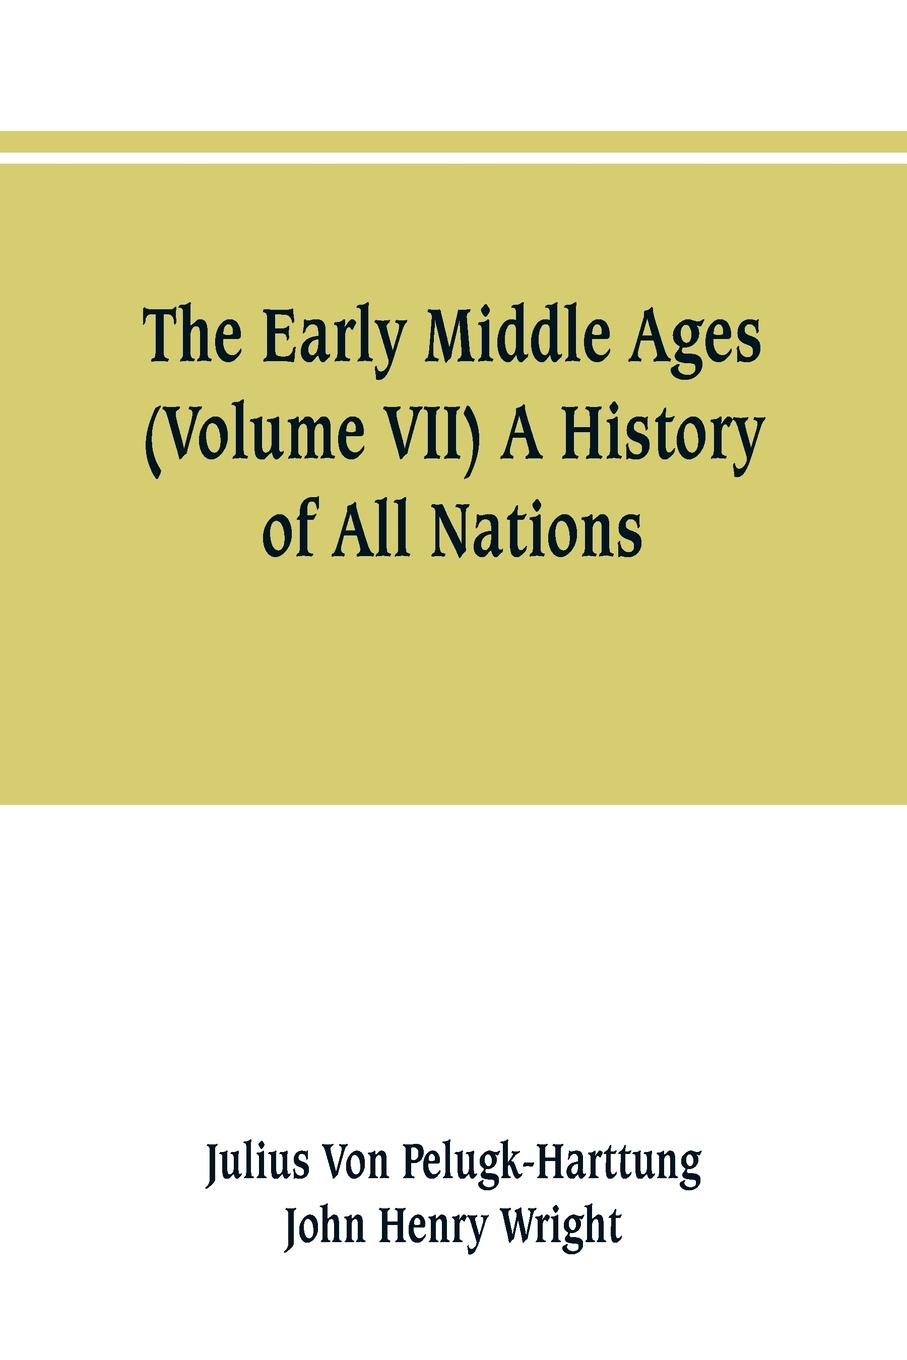 The Early Middle Ages (Volume VII) A History of All Nations